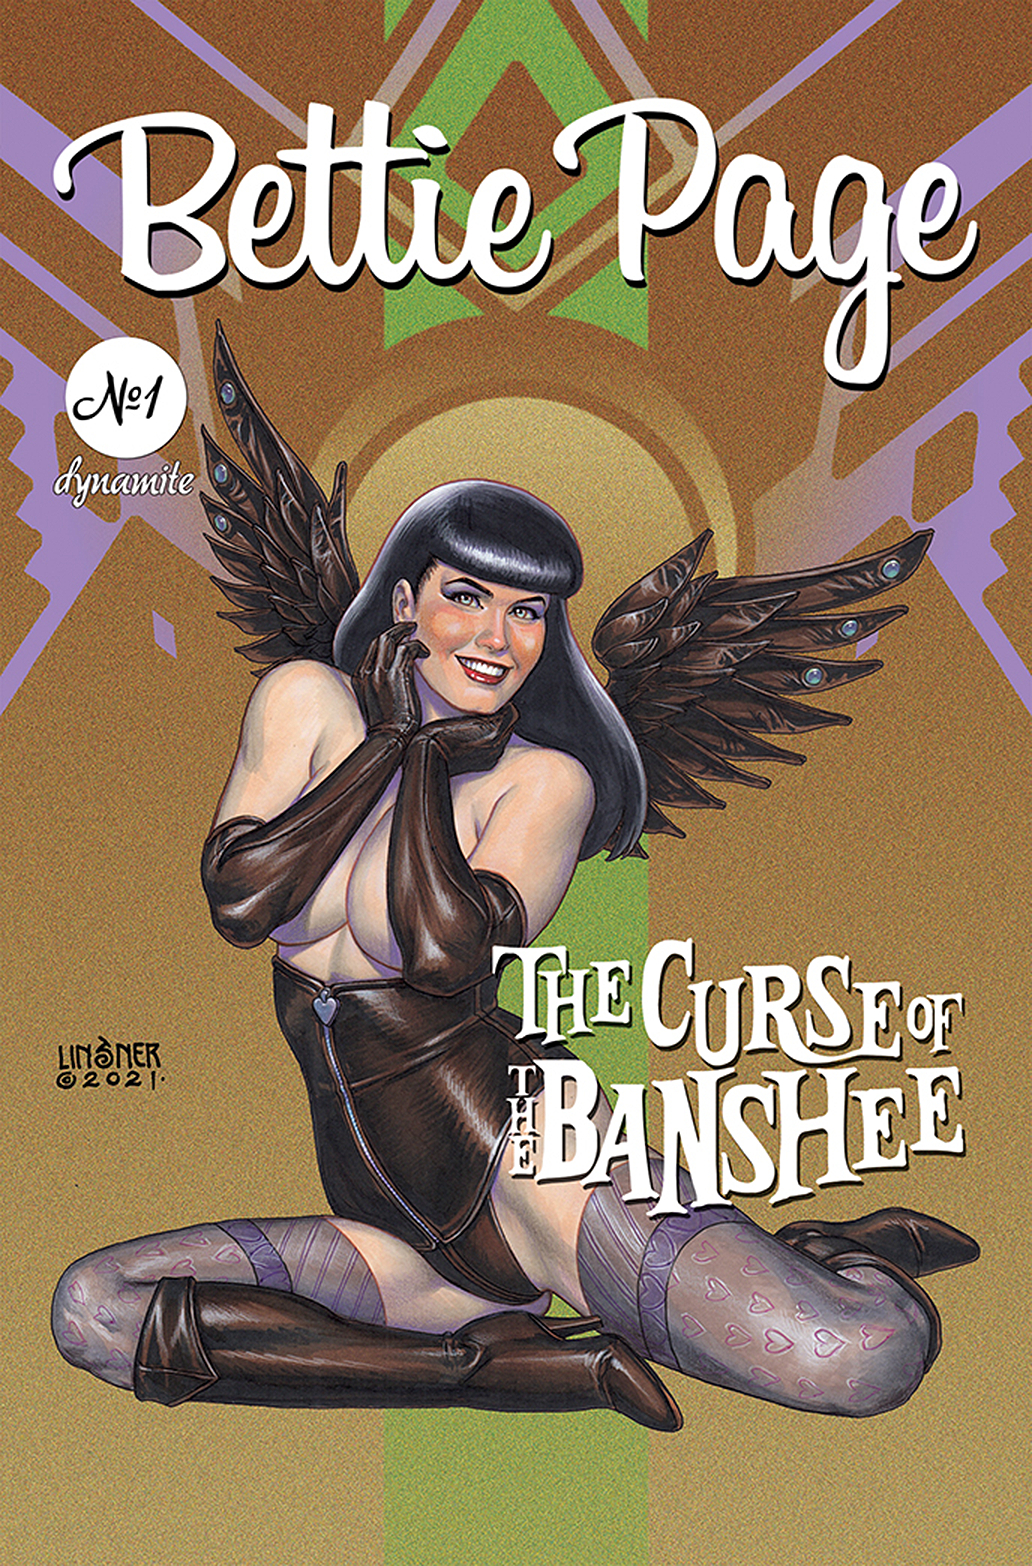 Bettie Page & Curse of the Banshee #1 Cover B Linsner